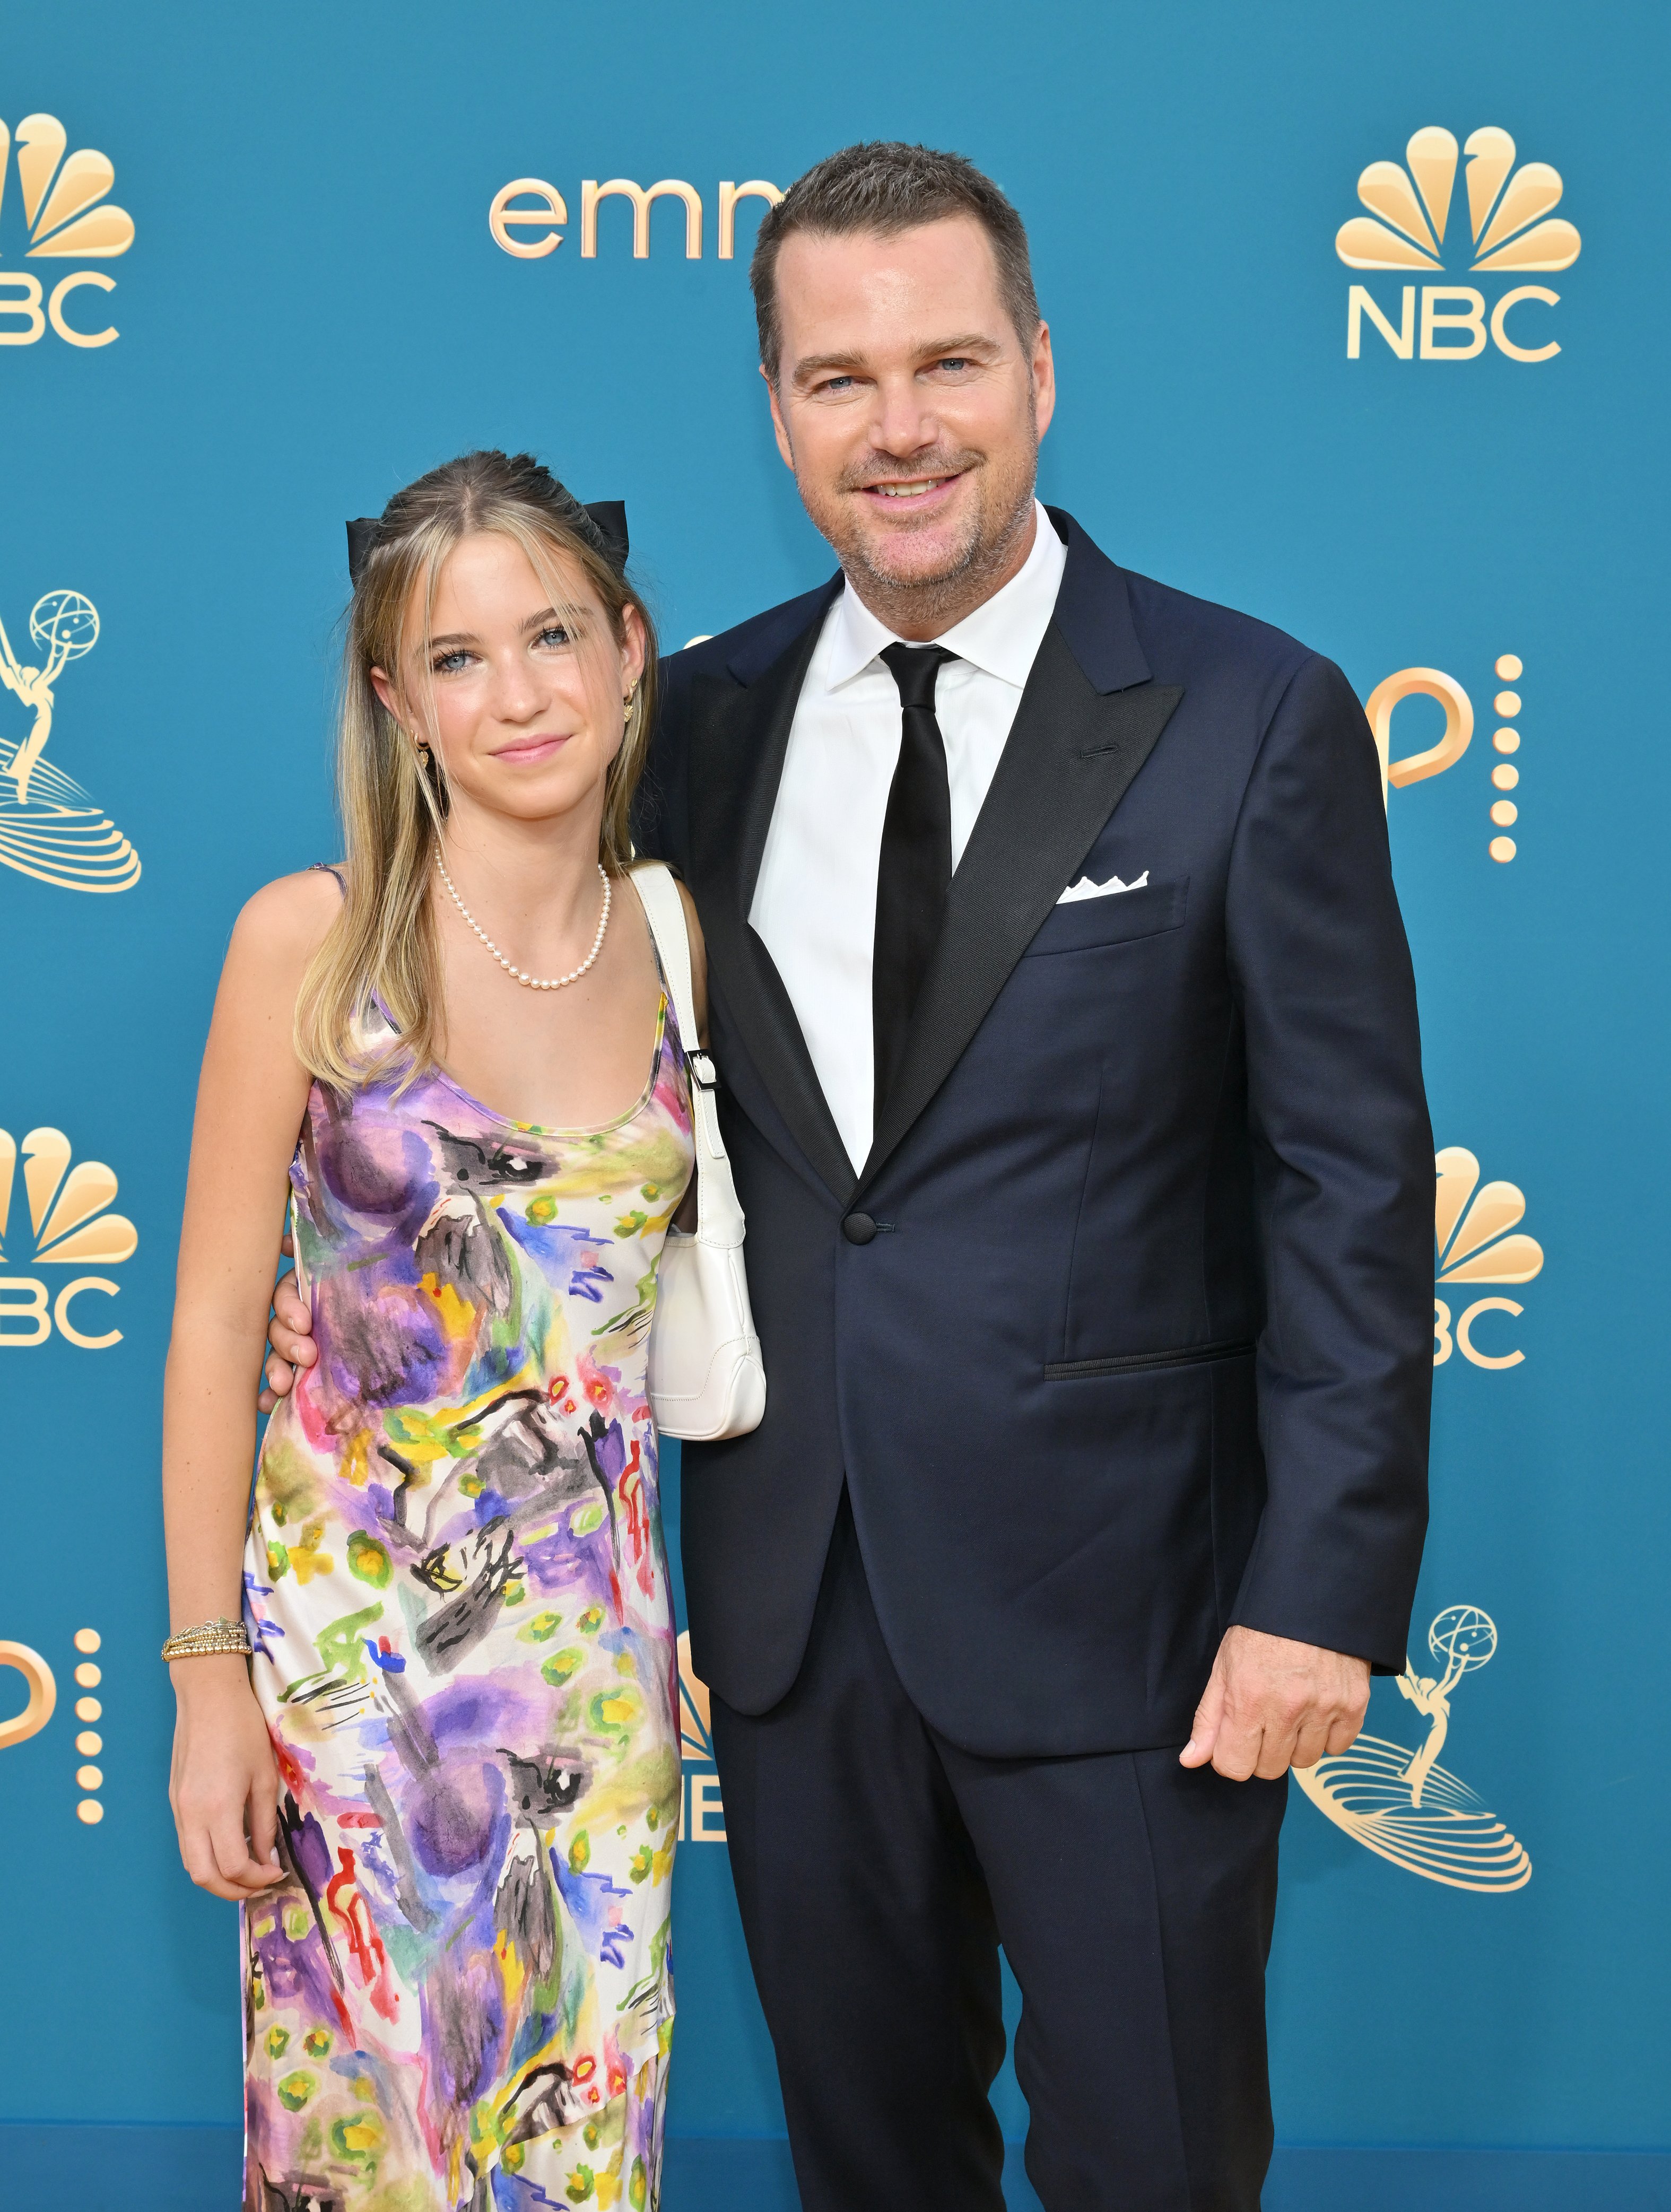 Maeve Frances O'Donnell and Chris O'Donnell at the 74th Primetime Emmy Awards held at Microsoft Theater on September 12, 2022 in Los Angeles, California | Source: Getty Images